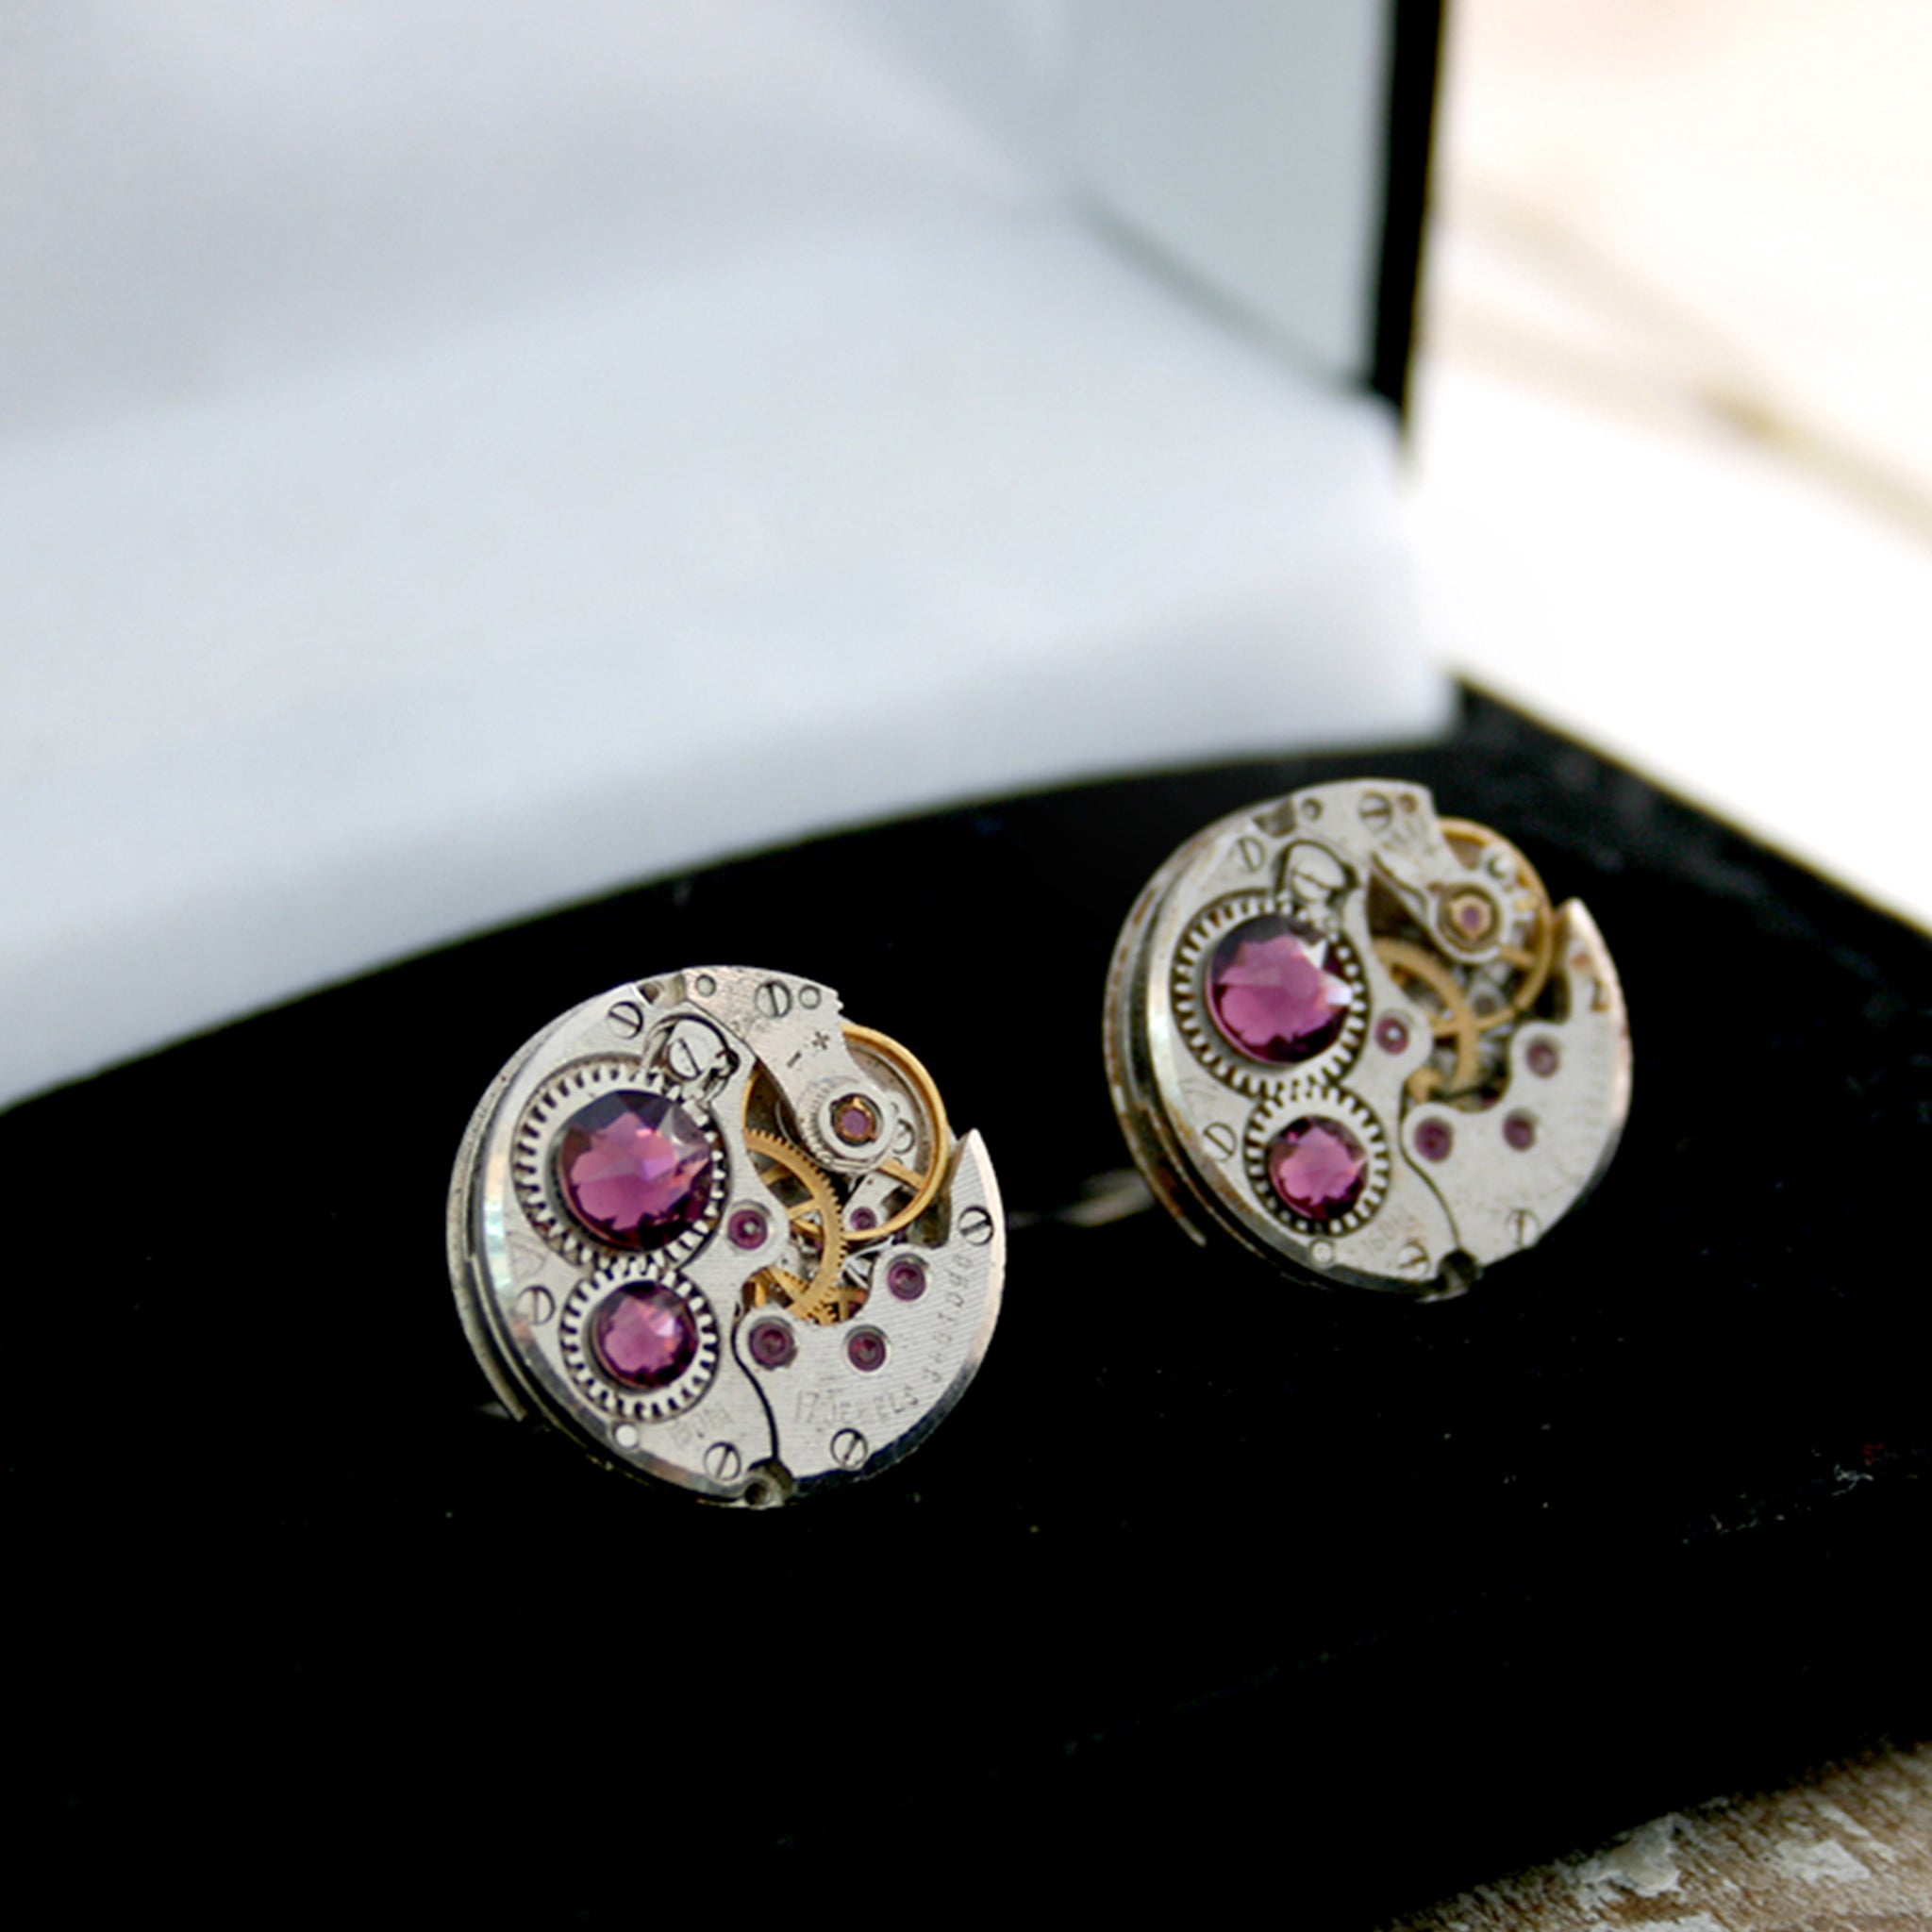  birthstone cufflinks in steampunk style featuring antique watch movements and Amethysts in a box